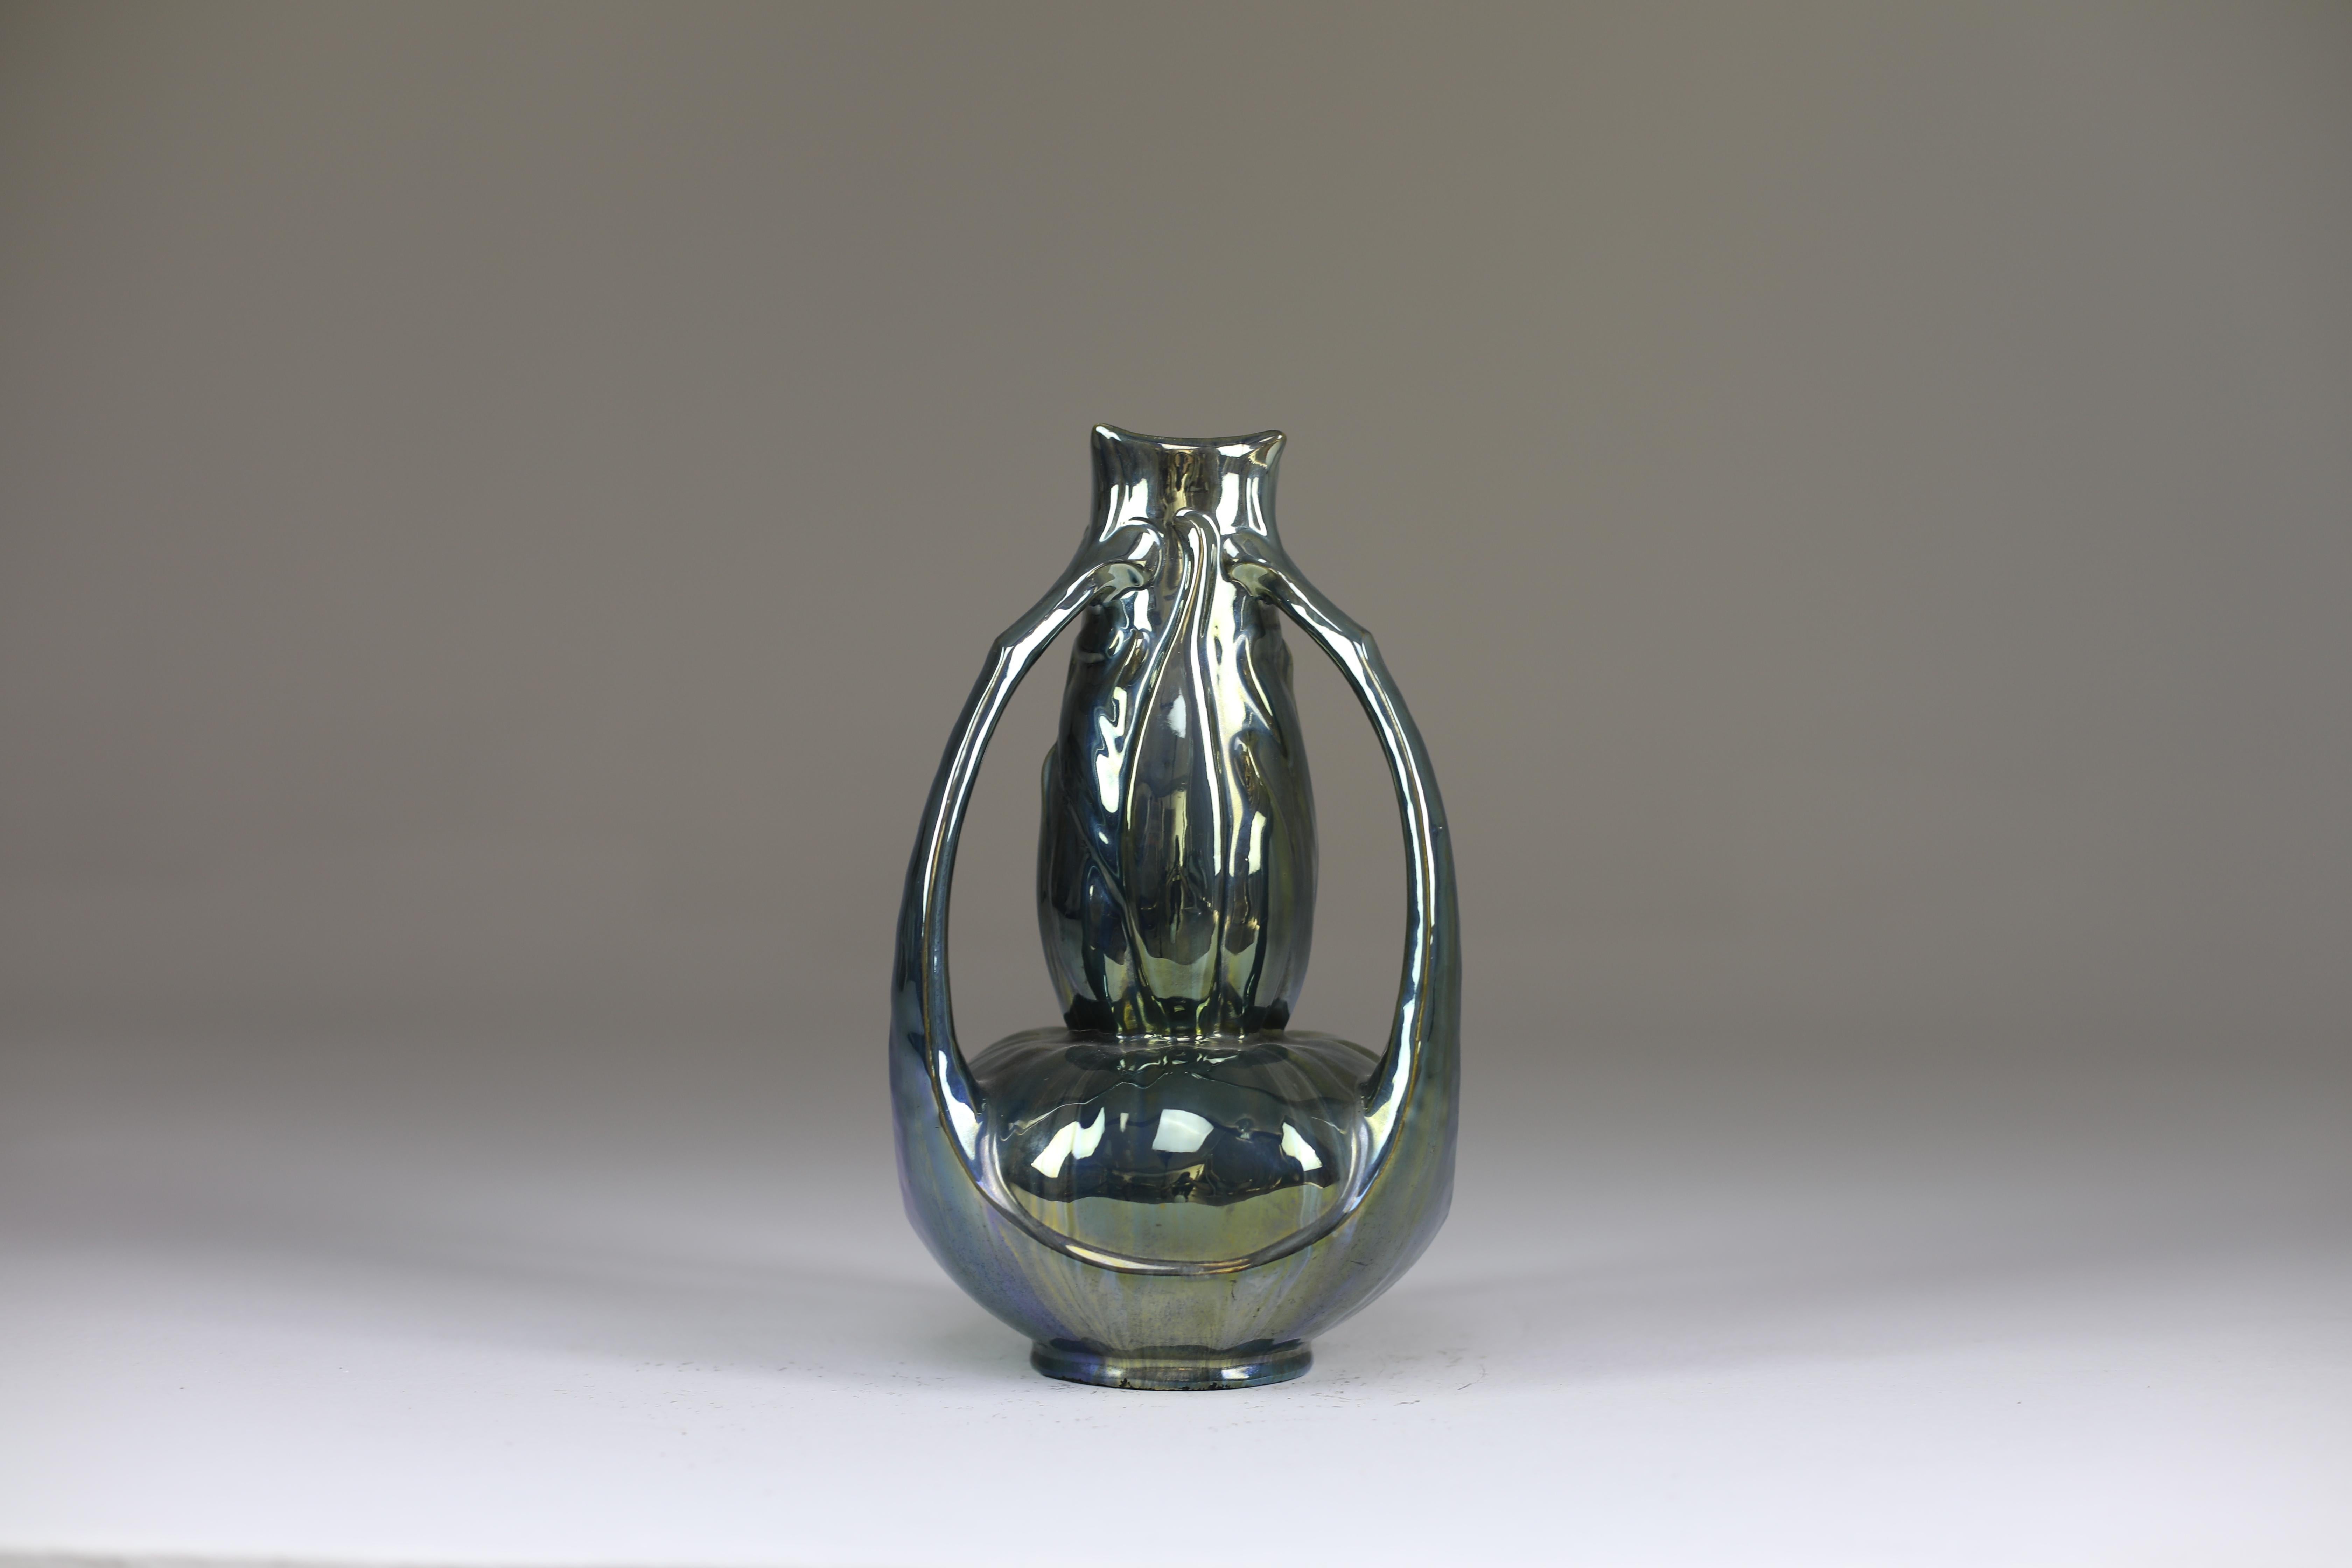 French Early 20th Century Art Nouveau Vase by Alphonse Cytère, 1910 For Sale